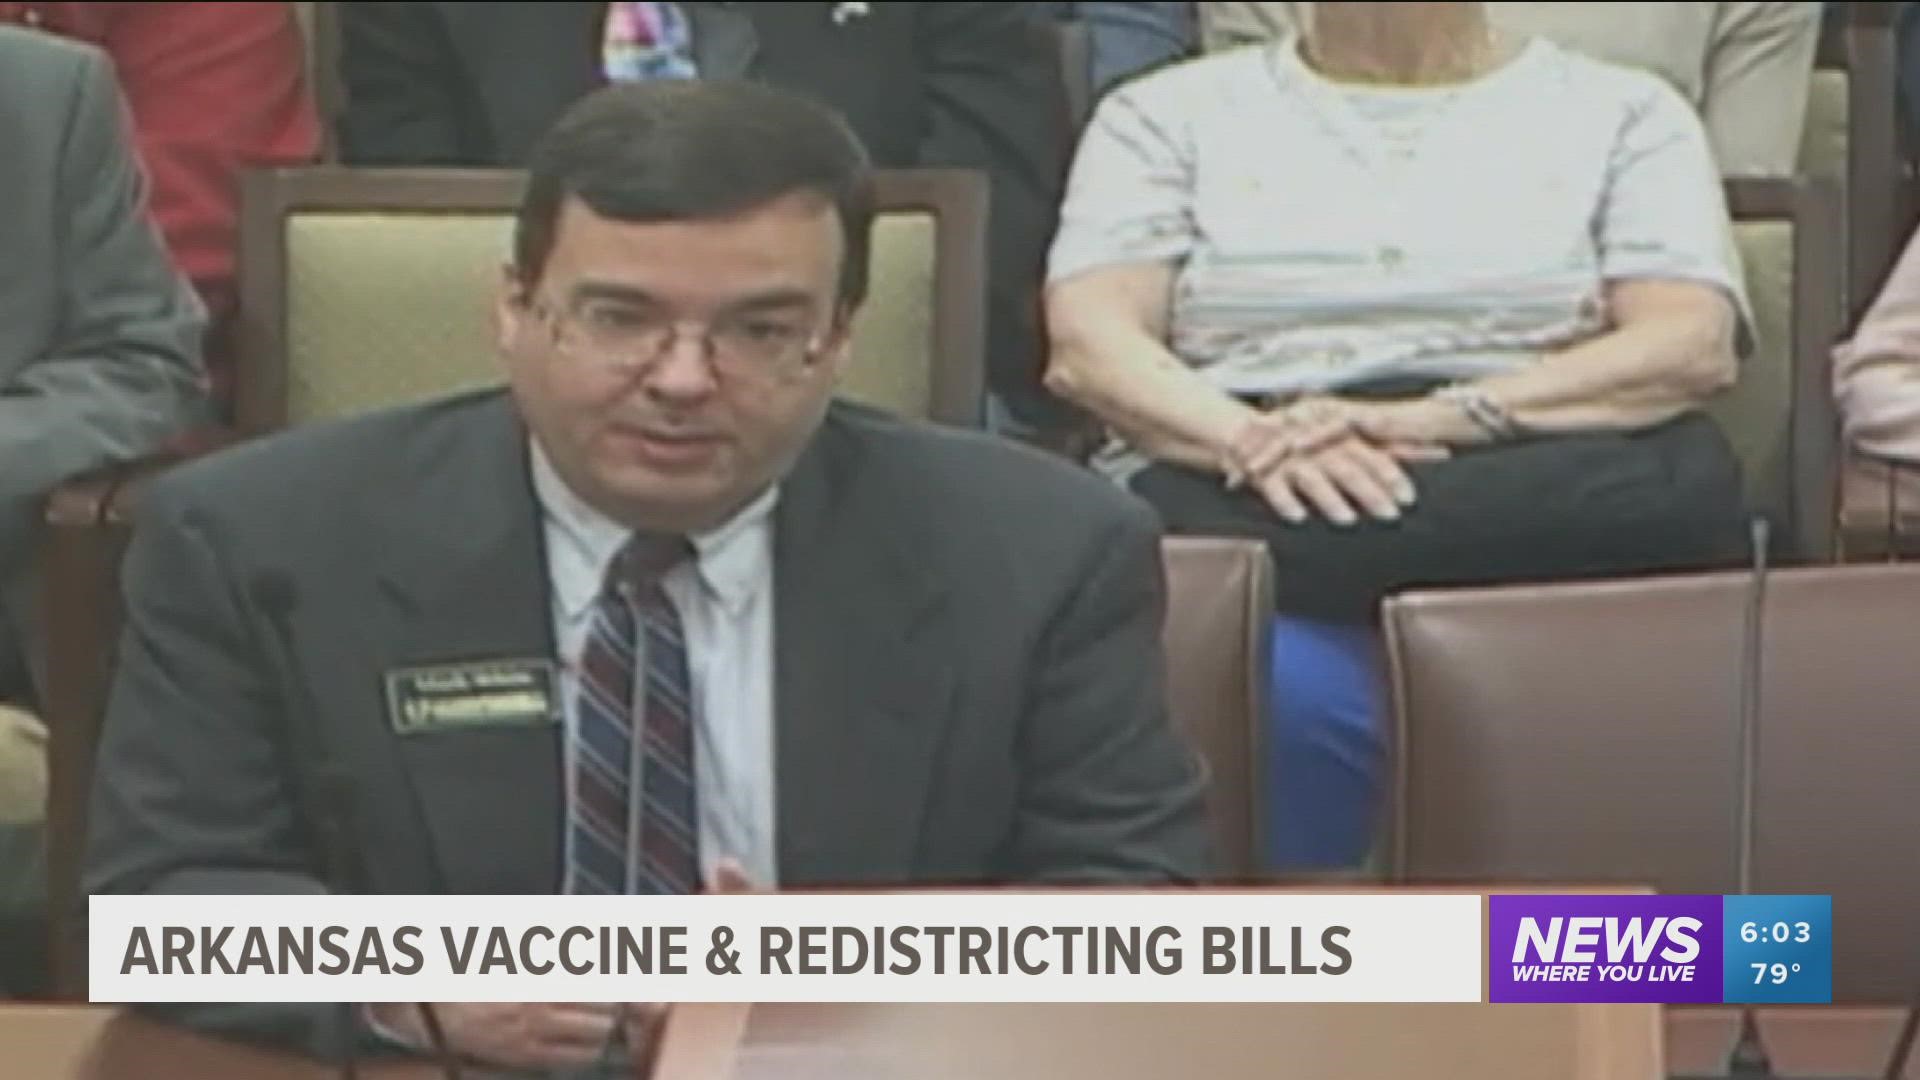 Senate Bill 731 would make COVID-19 vaccination status private information, eliminating employers requiring vaccines.